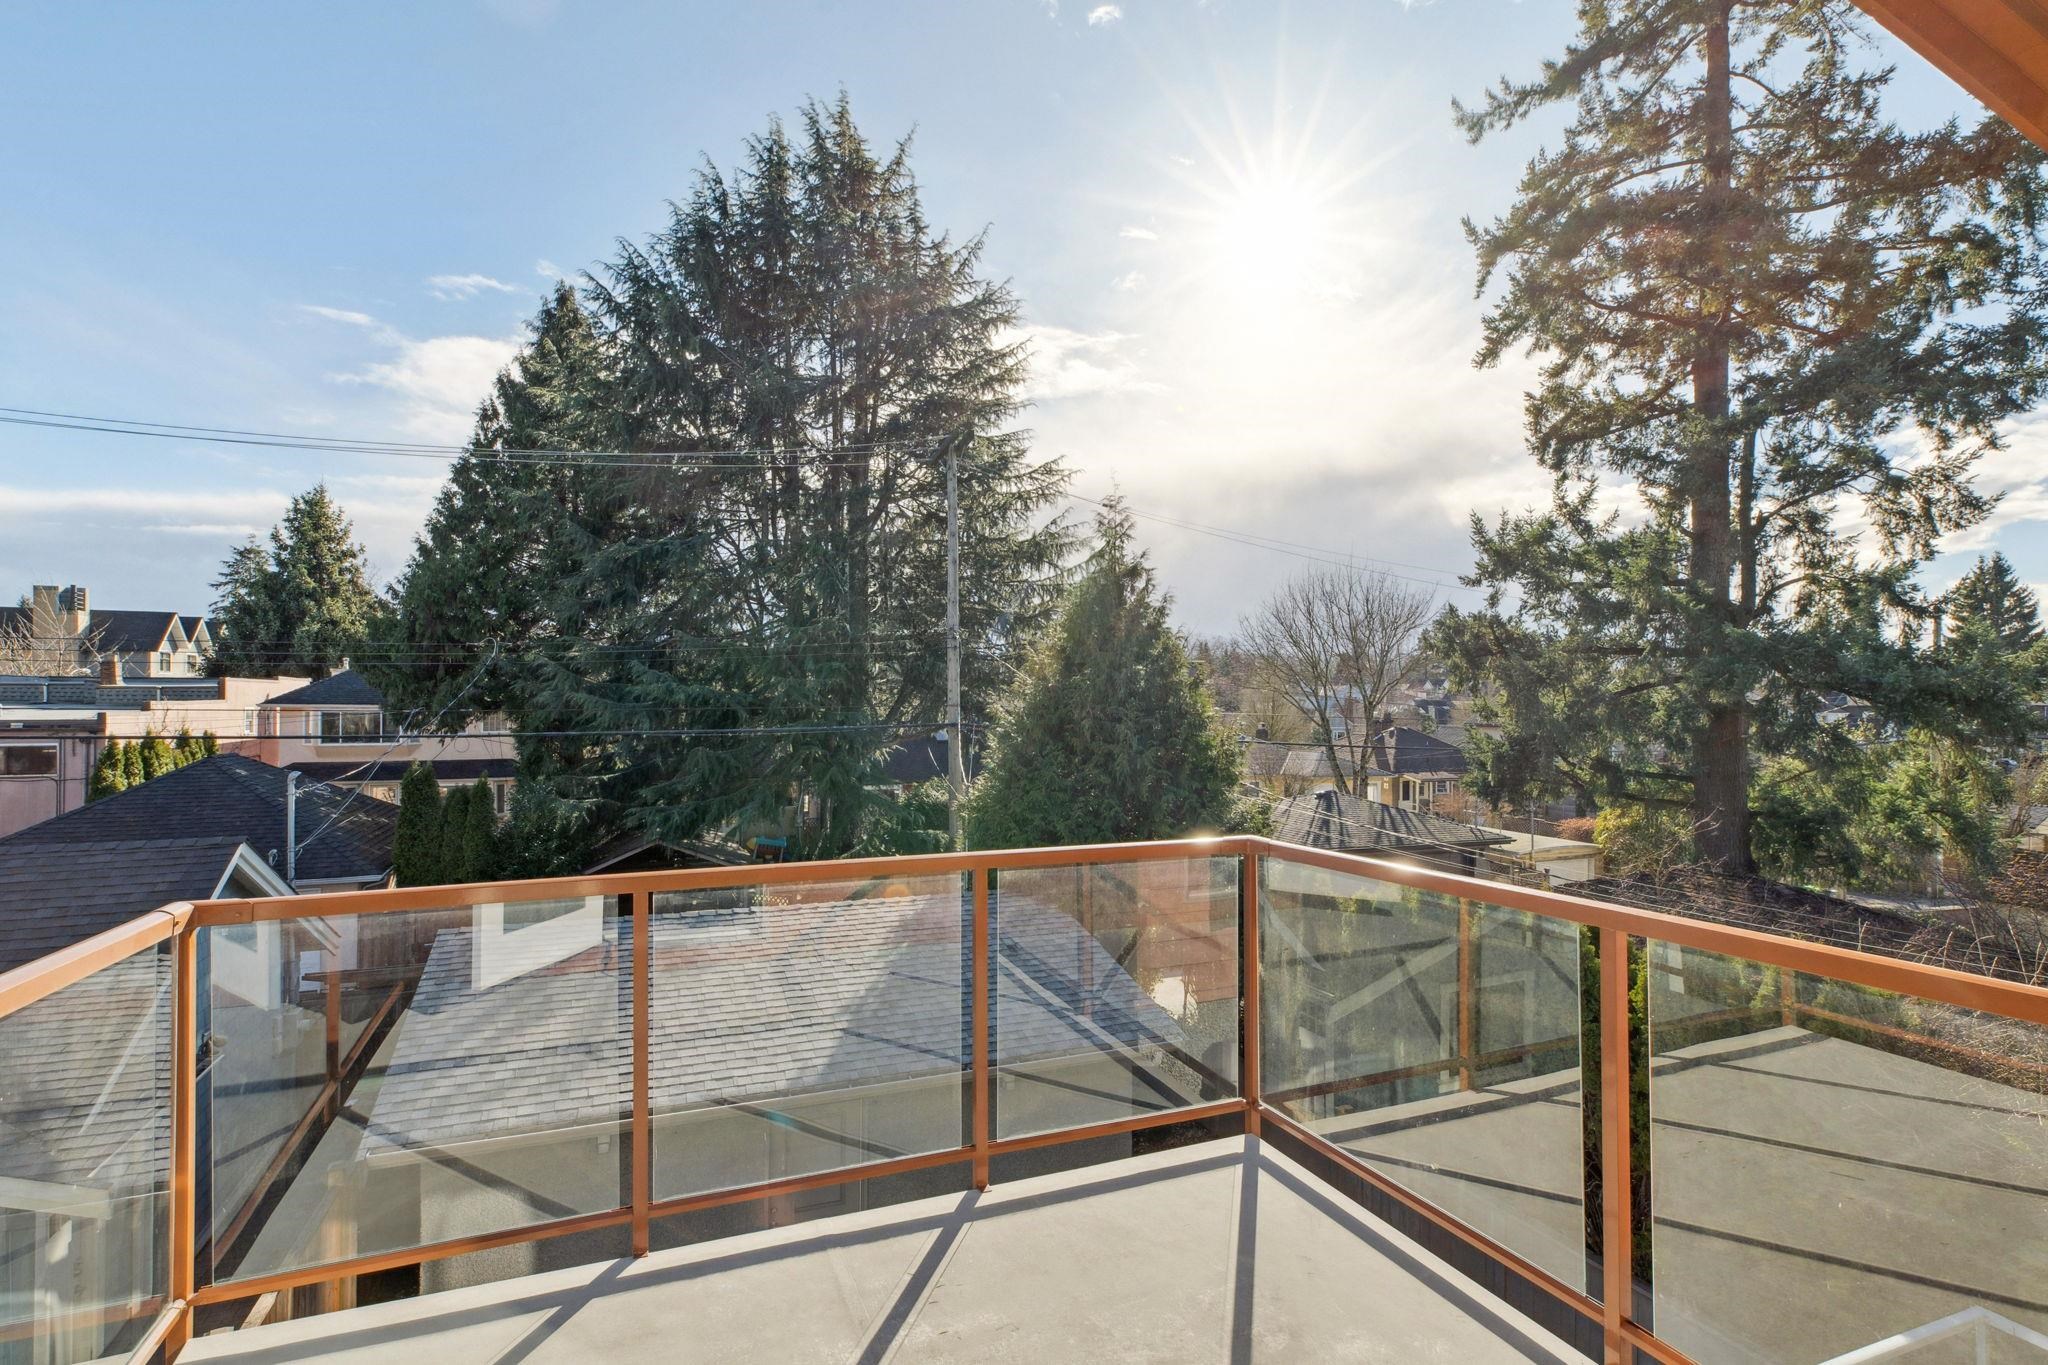 Listing image of 2928 W 32ND AVENUE